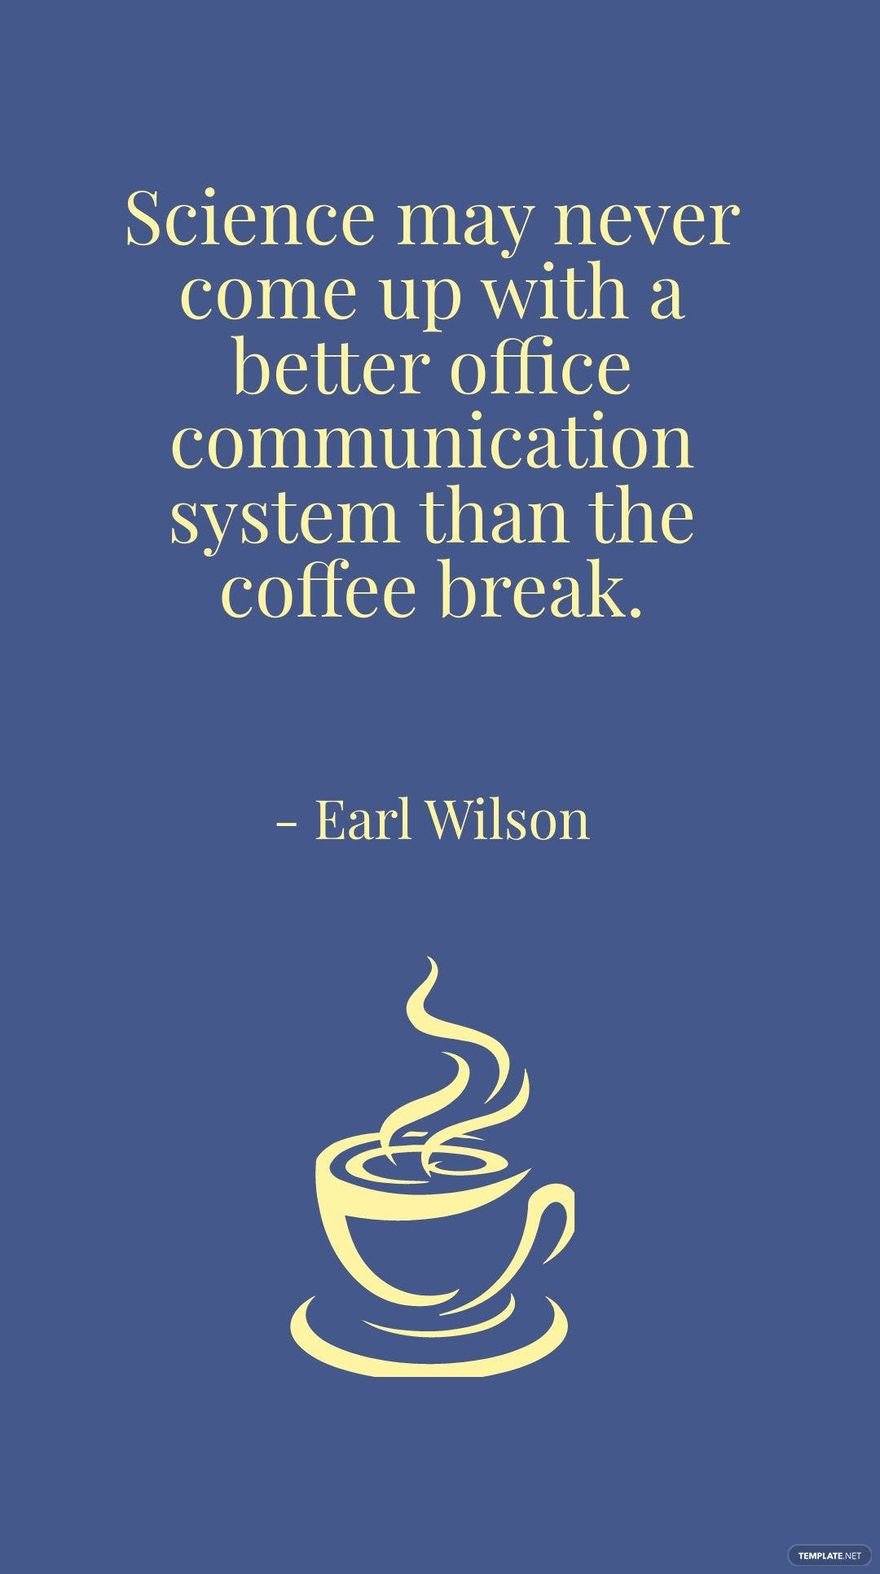 Free Earl Wilson - Science may never come up with a better office communication system than the coffee break. in JPG